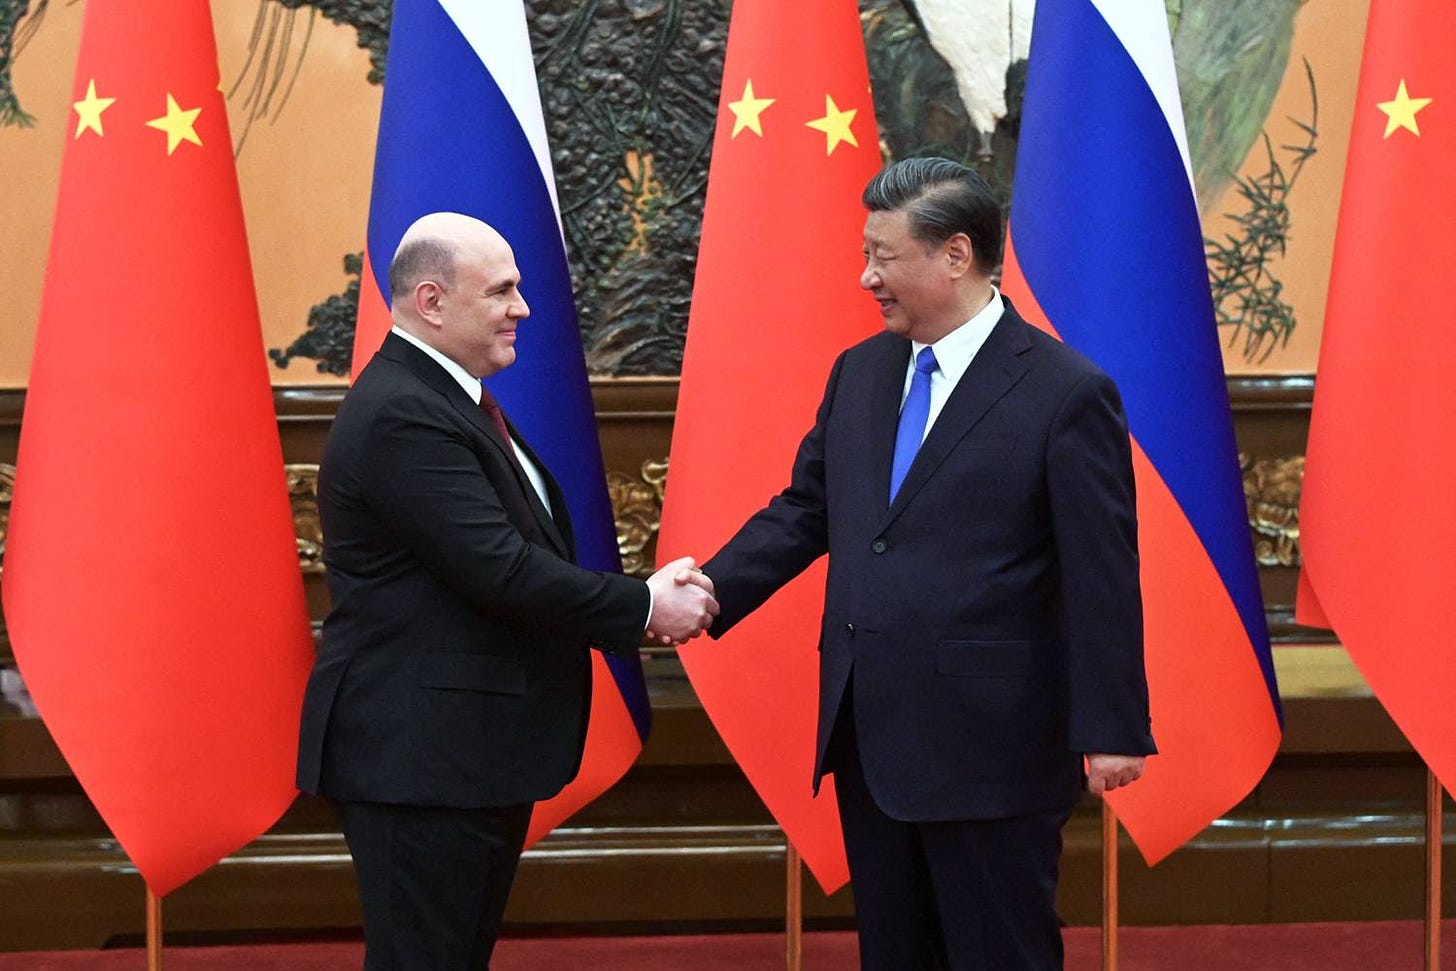 Mishustin and Xi shake hands in front of a row of alternating Chinese and Russian flags